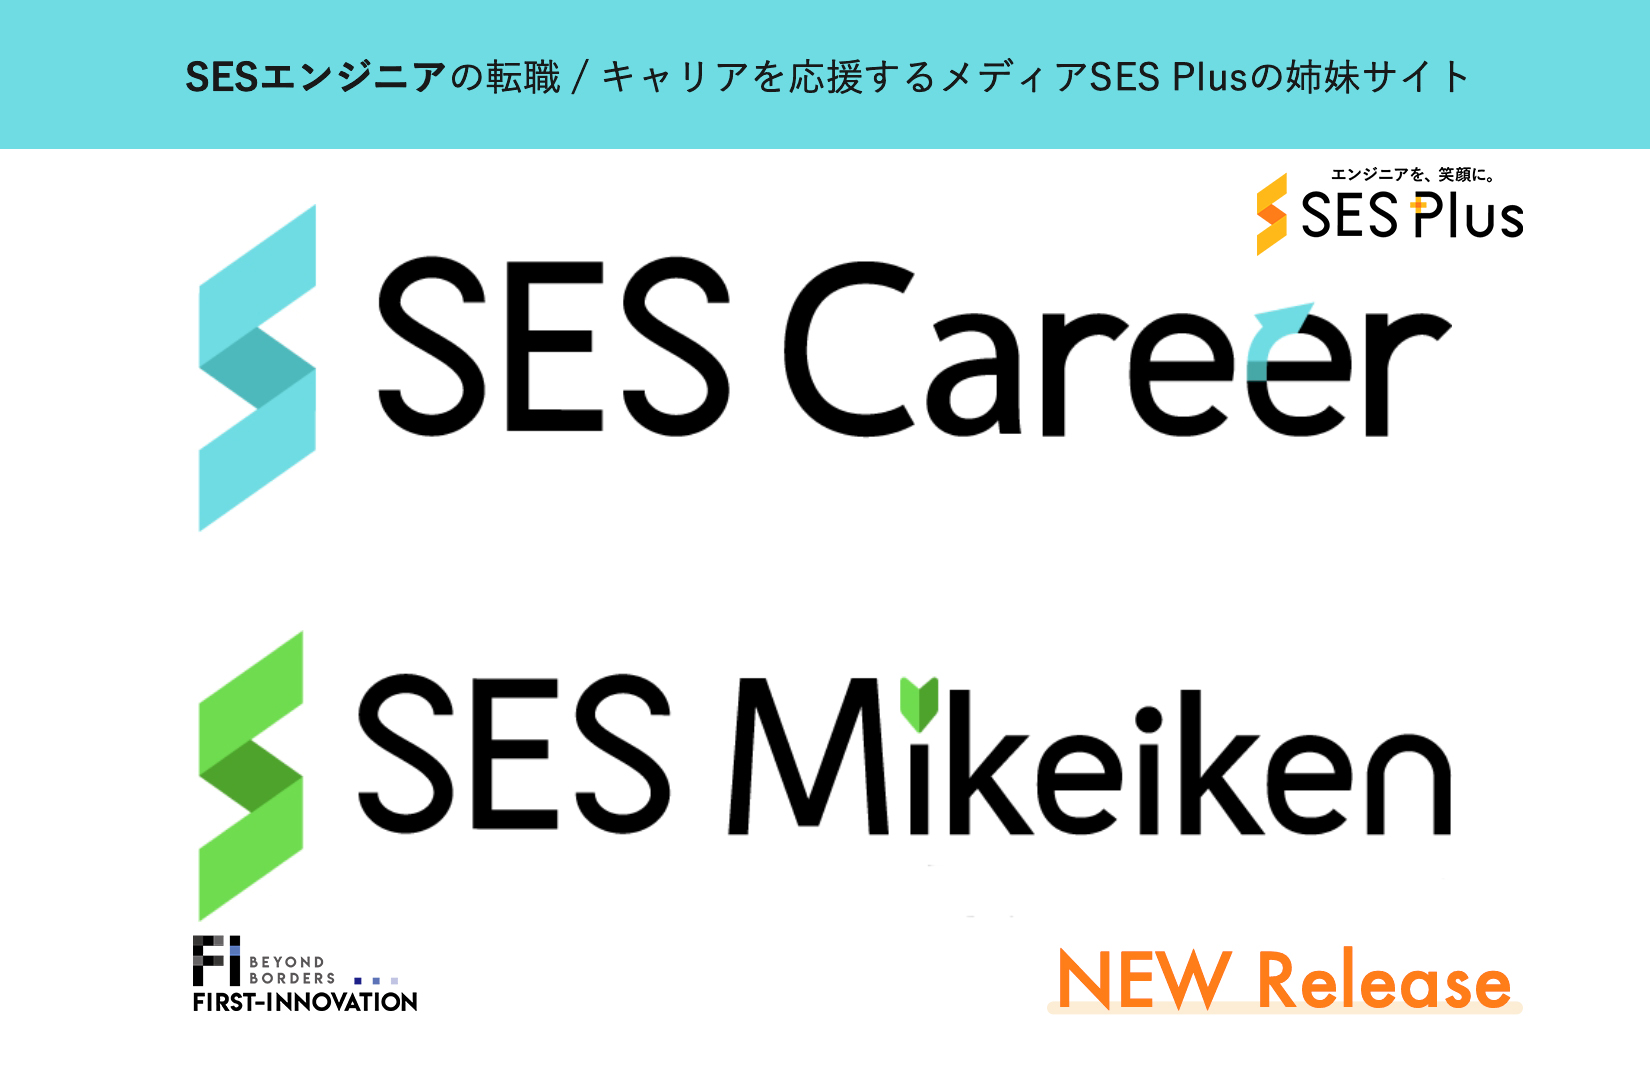 SESエンジニア向けの求人情報サイト「SES Career・SES Mikeiken」をリリース